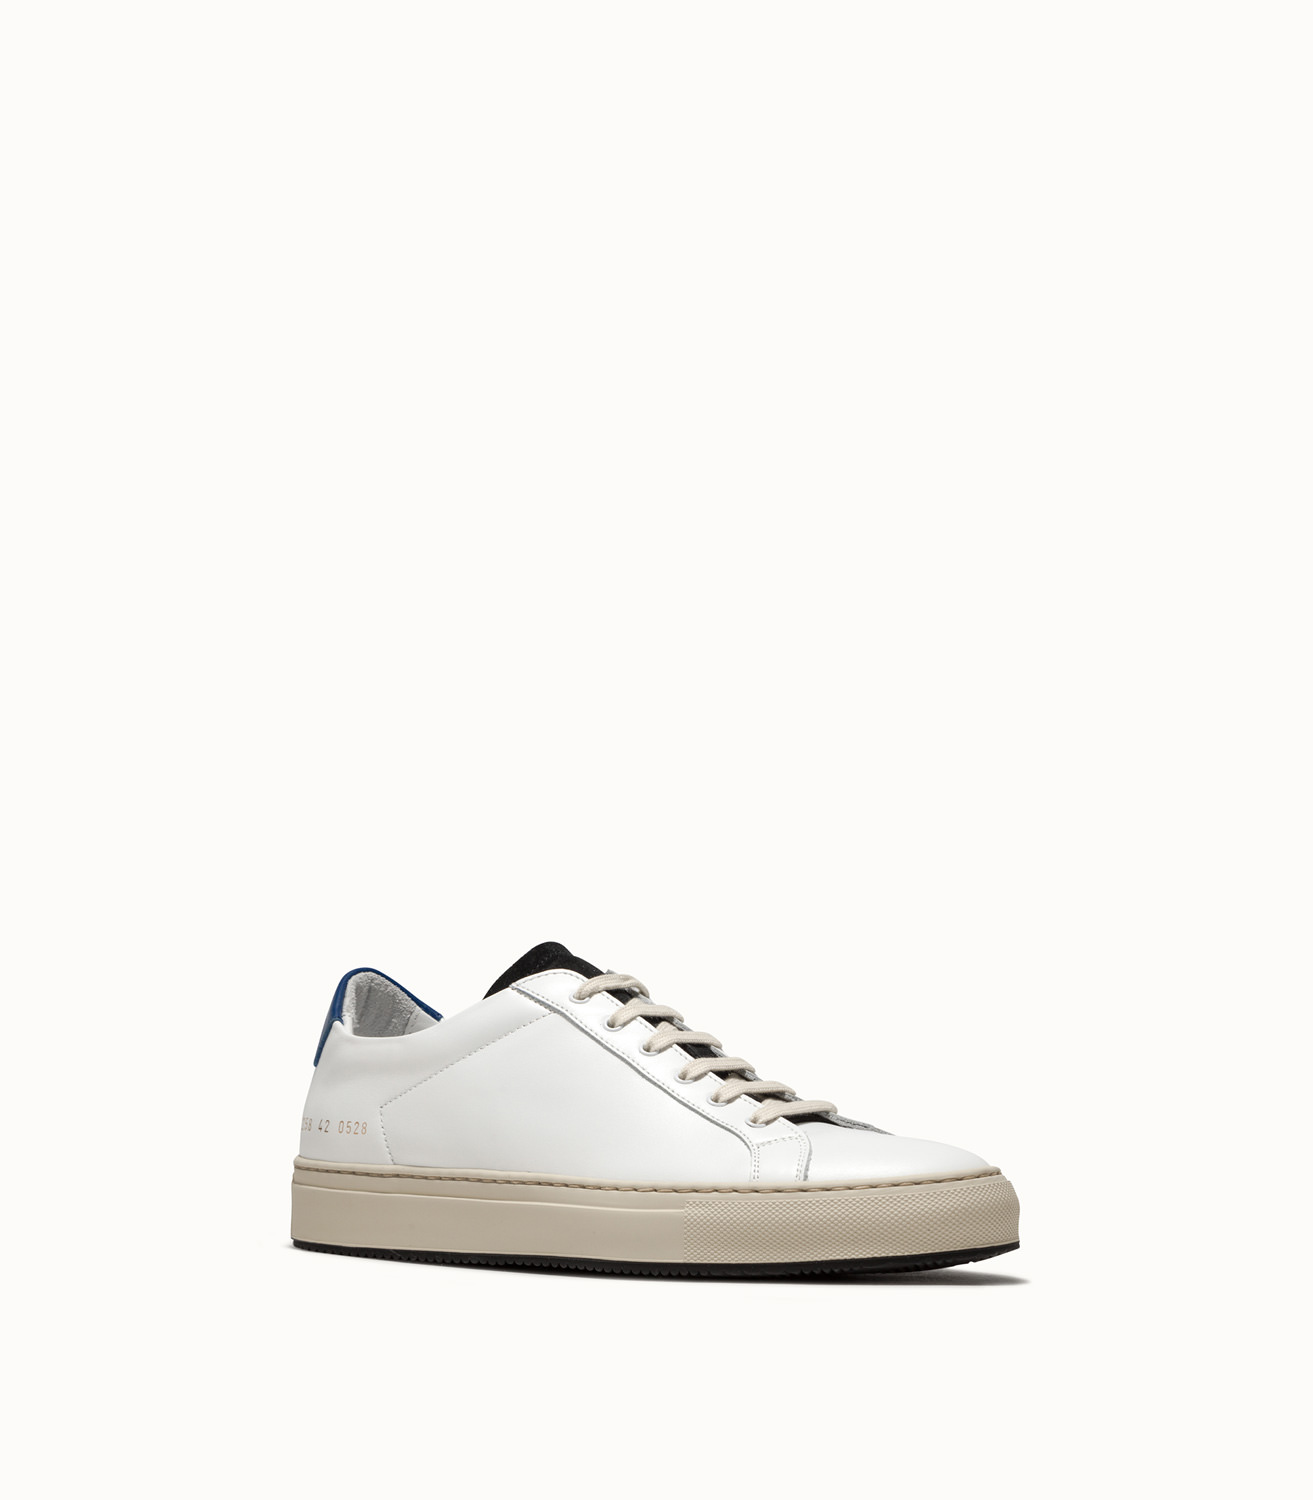 COMMON PROJECTS RETRO LOW SPECIAL 